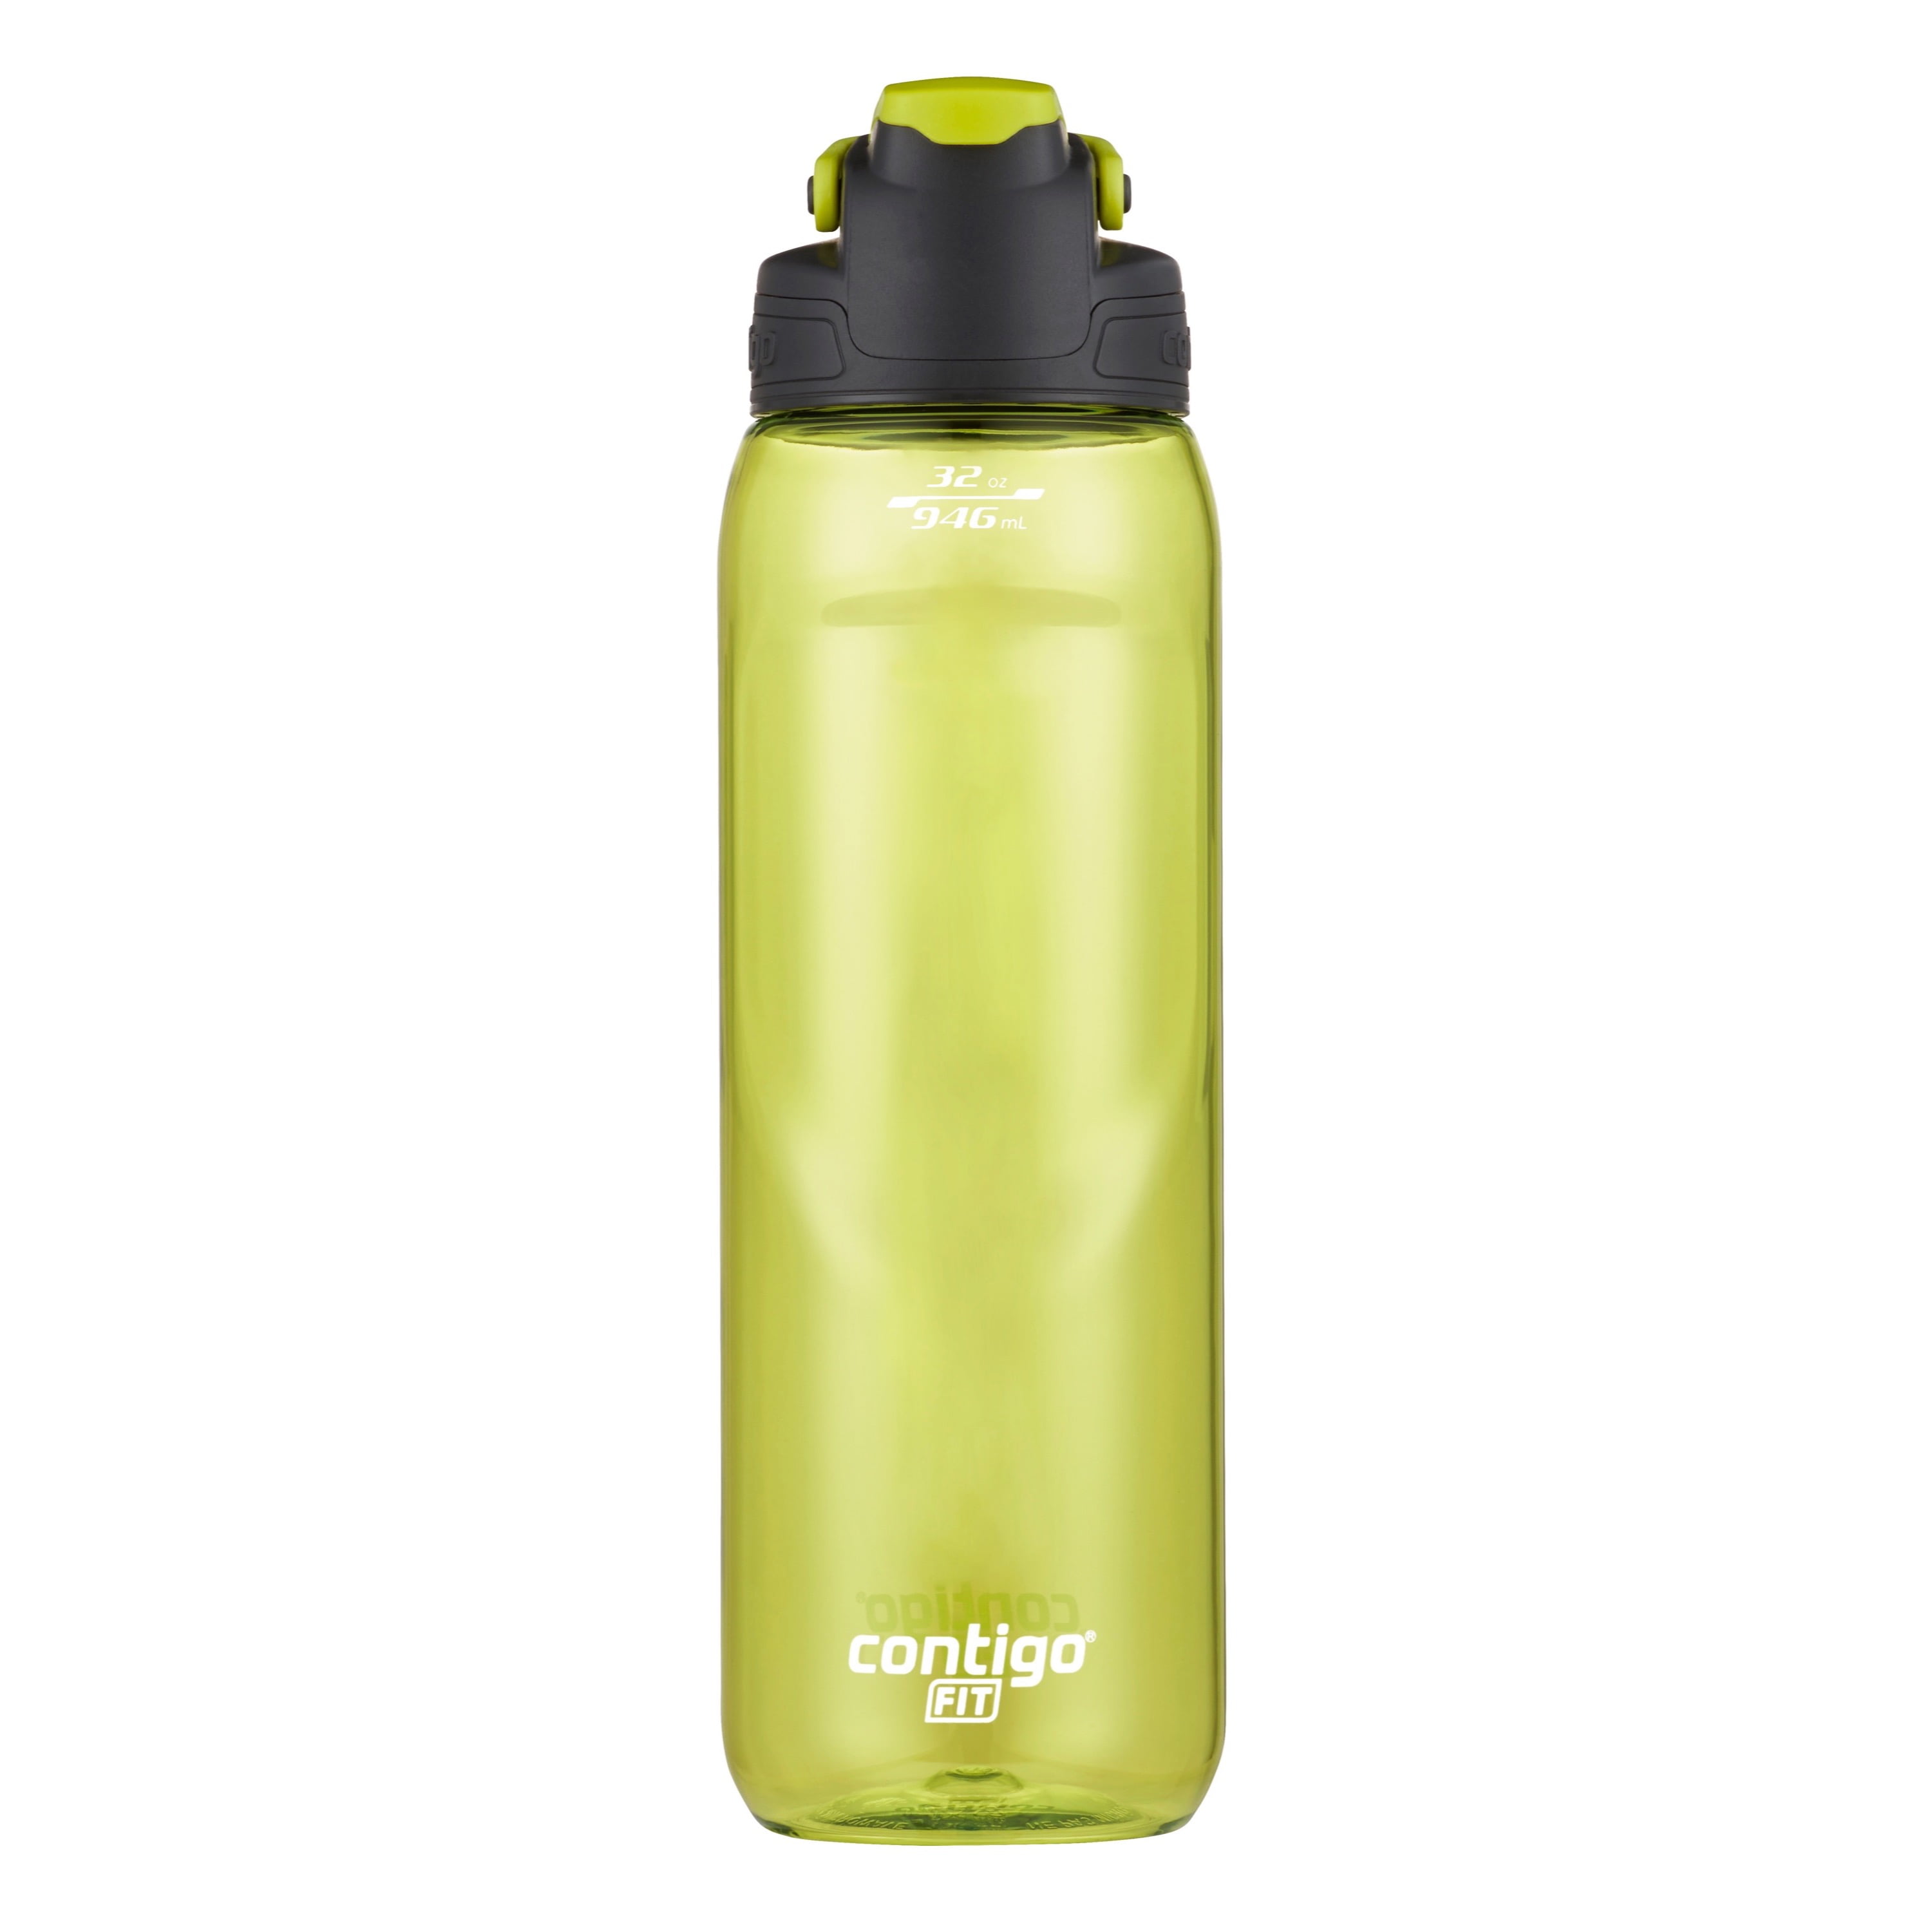 SANTECO Water Bottles, 32 oz Reusable Wide Mouth Sports Bottle, Easy to  Clean BPA Free Tritan, Double Wall Insulated Light Weight Bottles with  Handle